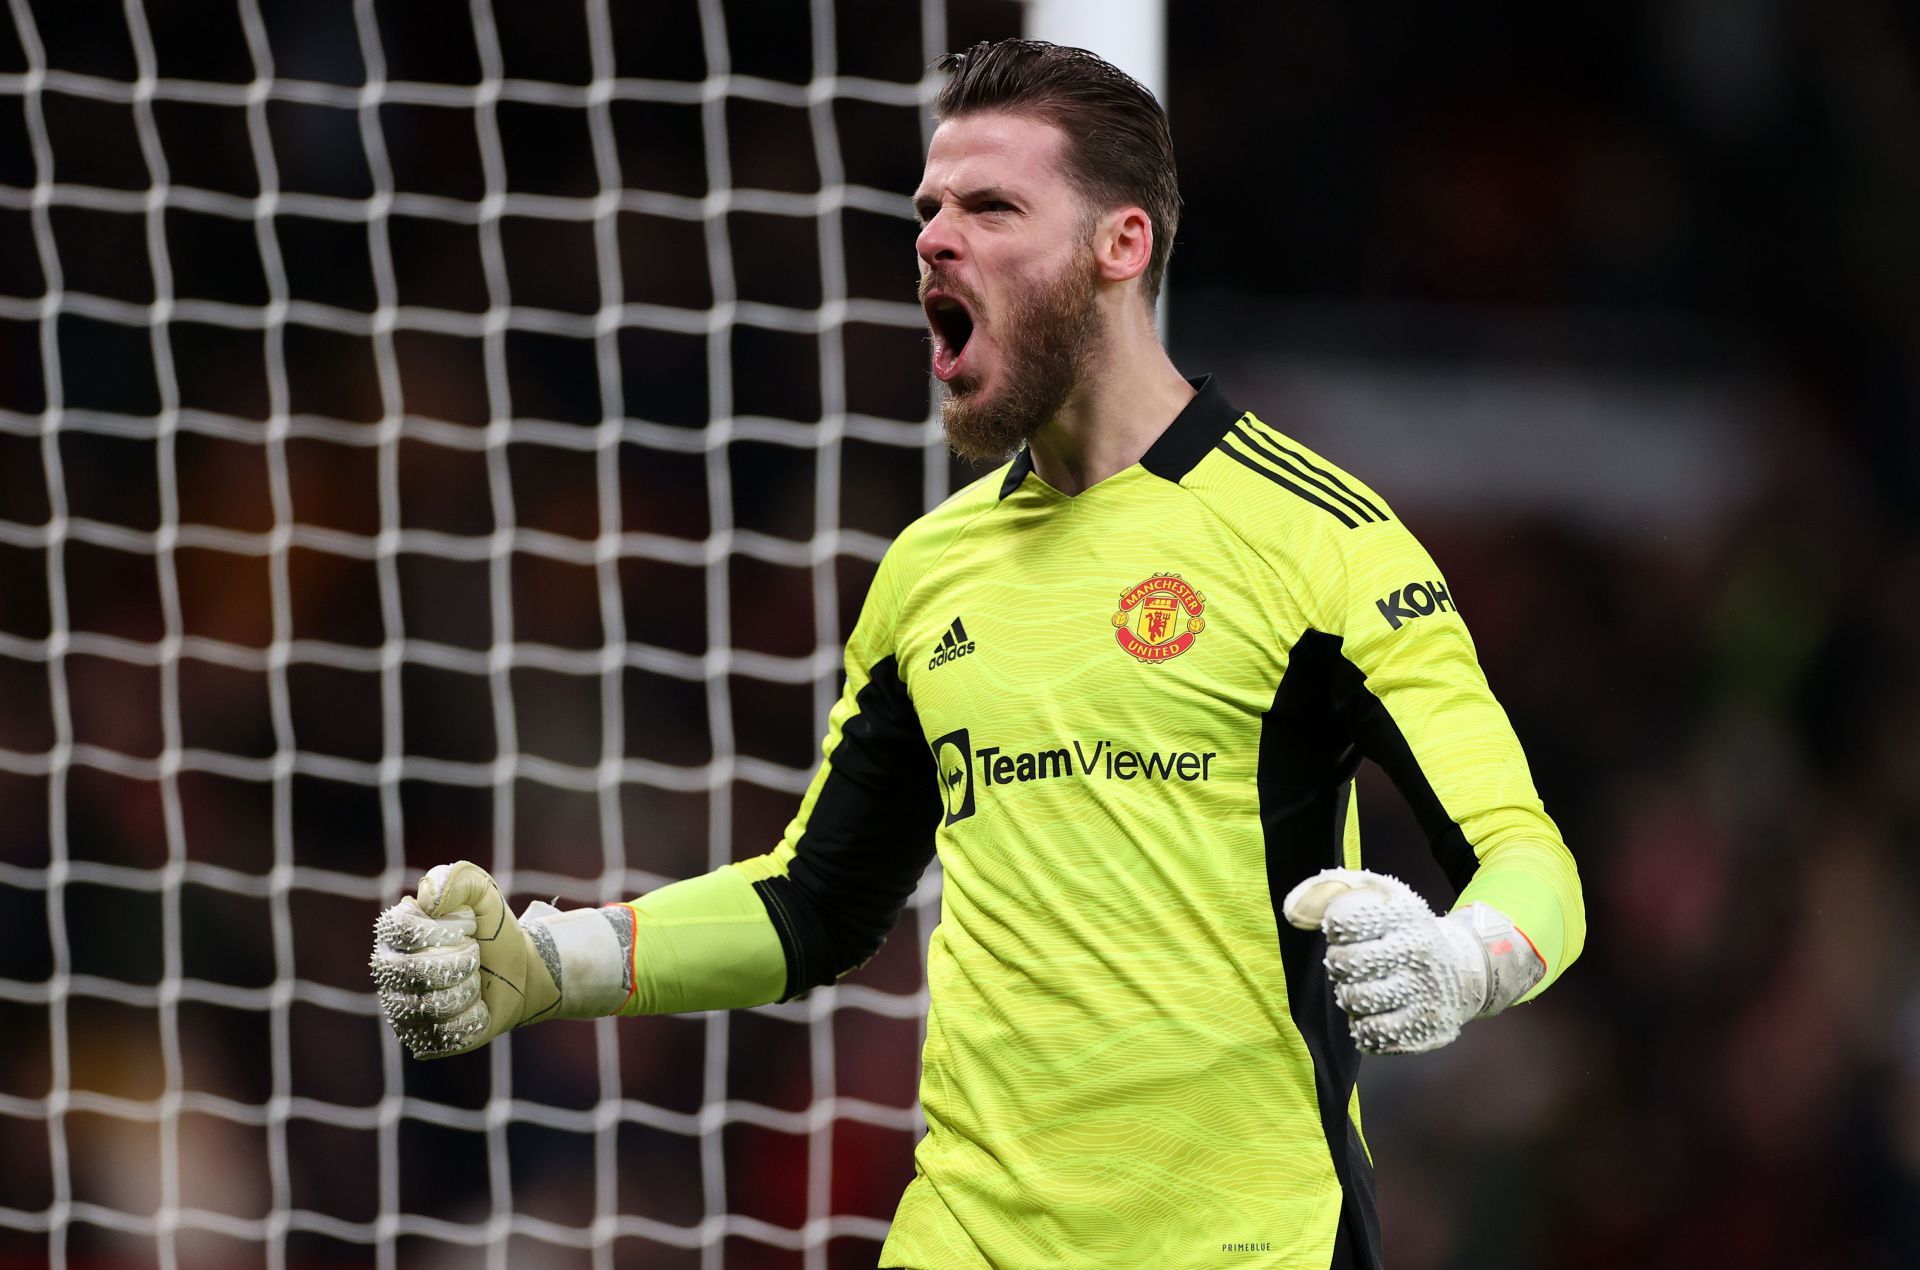 David de Gea is one of the longest-serving players at Manchester United.